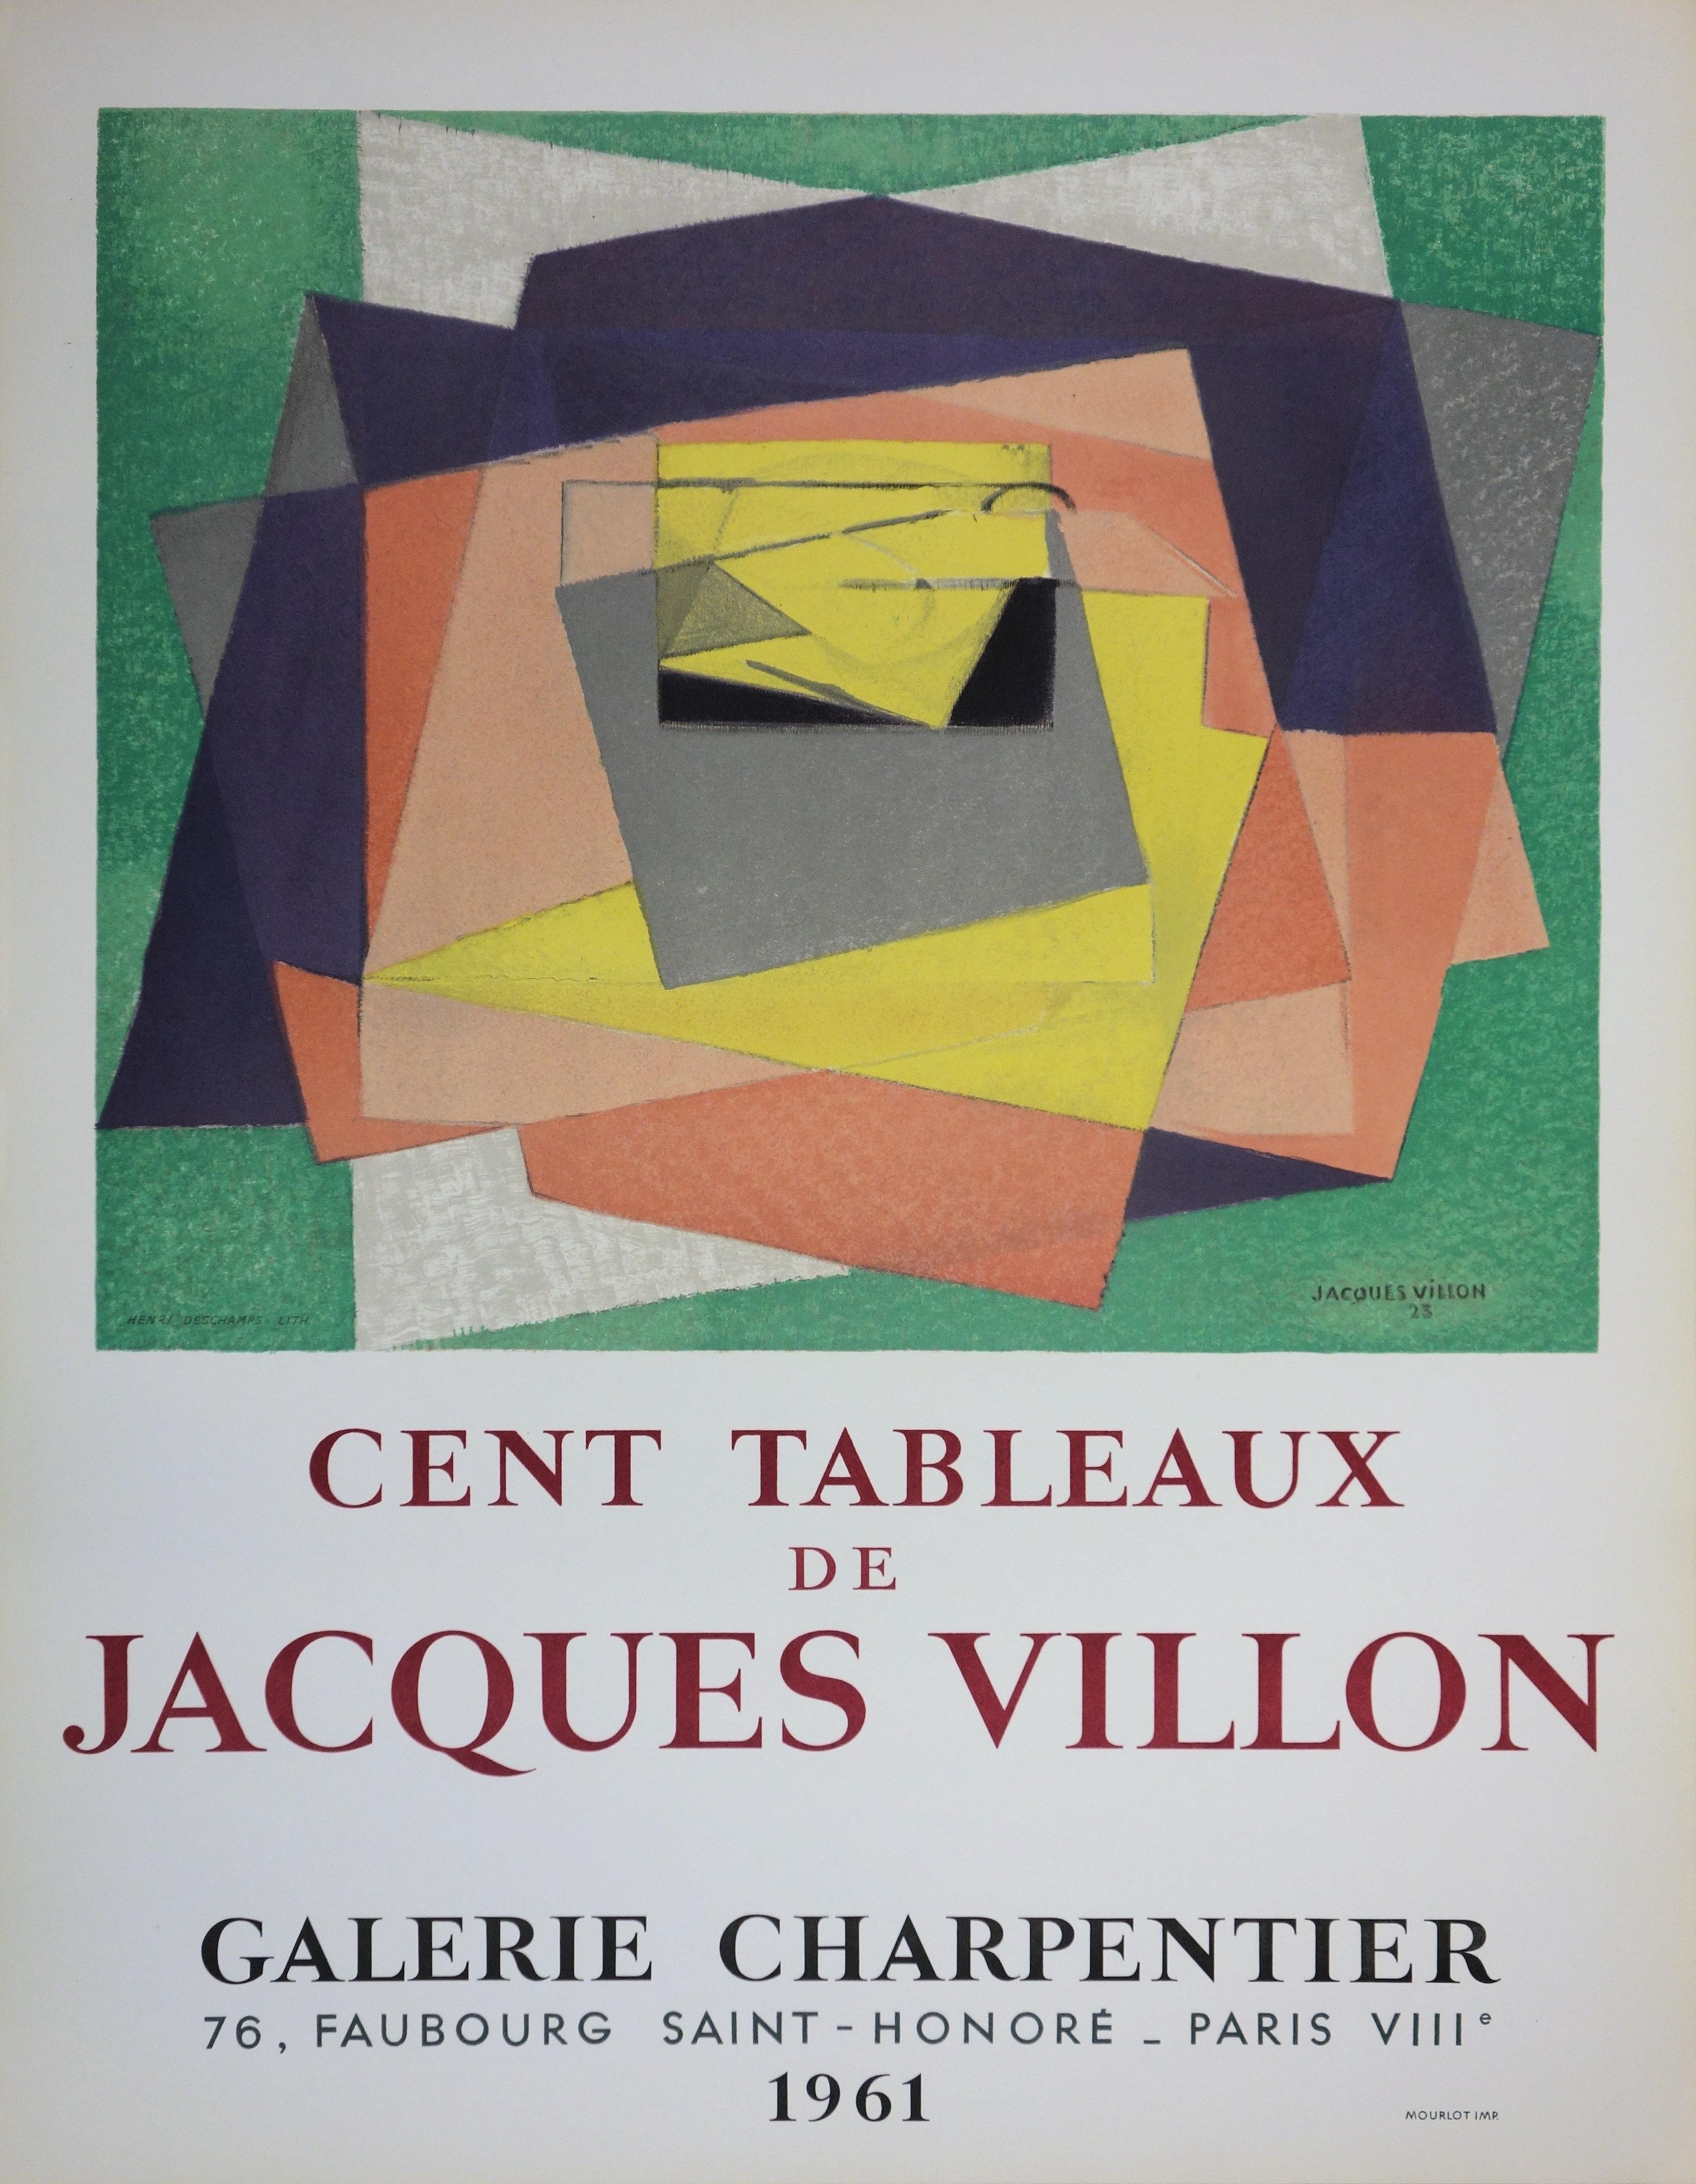 Jacques VILLON (after)
Abstract Cubist Composition

Stone Lithograph (engraved by Deschamps after the painting of Villon)
Printed signature in the plate
Printed in Mourlot workshop in 1961
Created for the exhibition "Cent tableaux" at Gallery